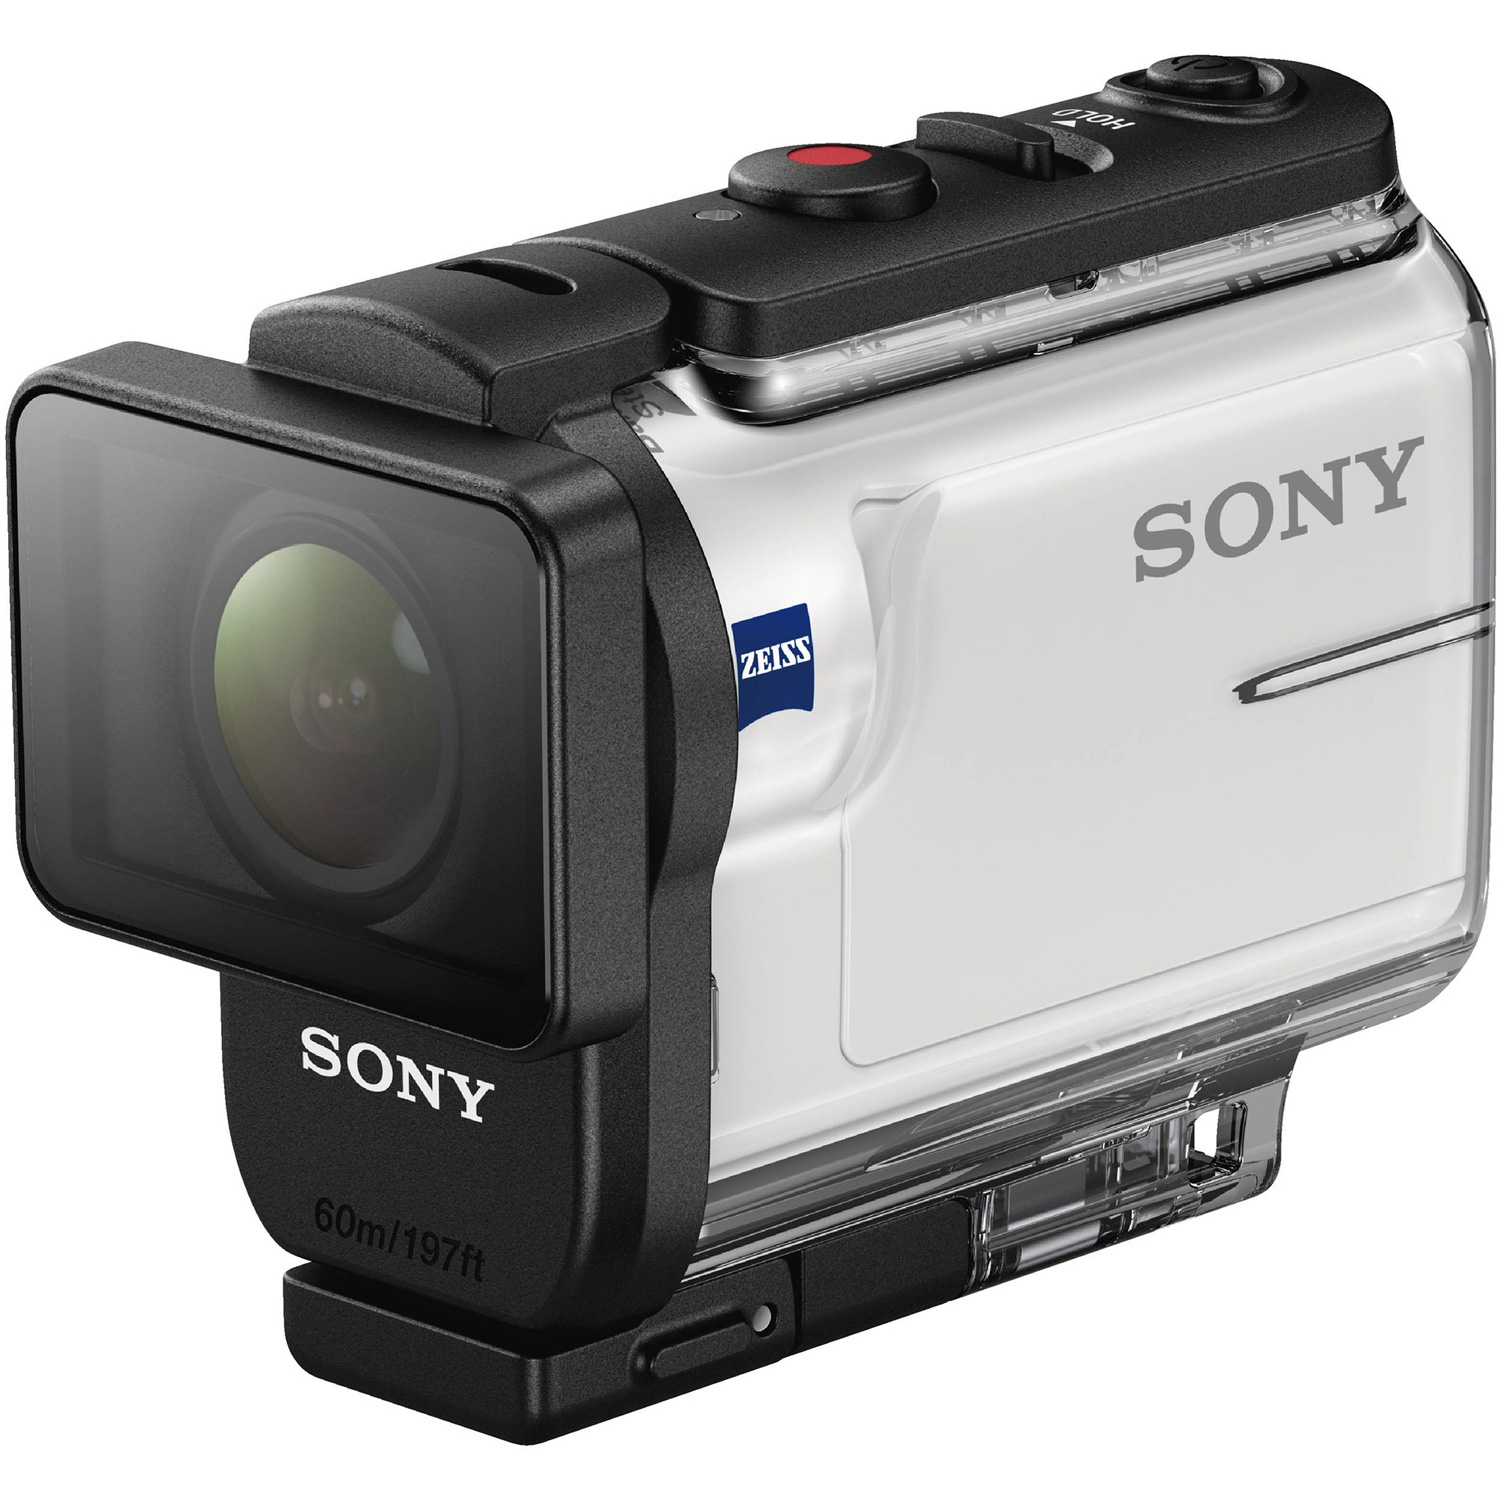 SONY digital HD video camera recorder Action Cam HDR-AS300R (White)（Ja